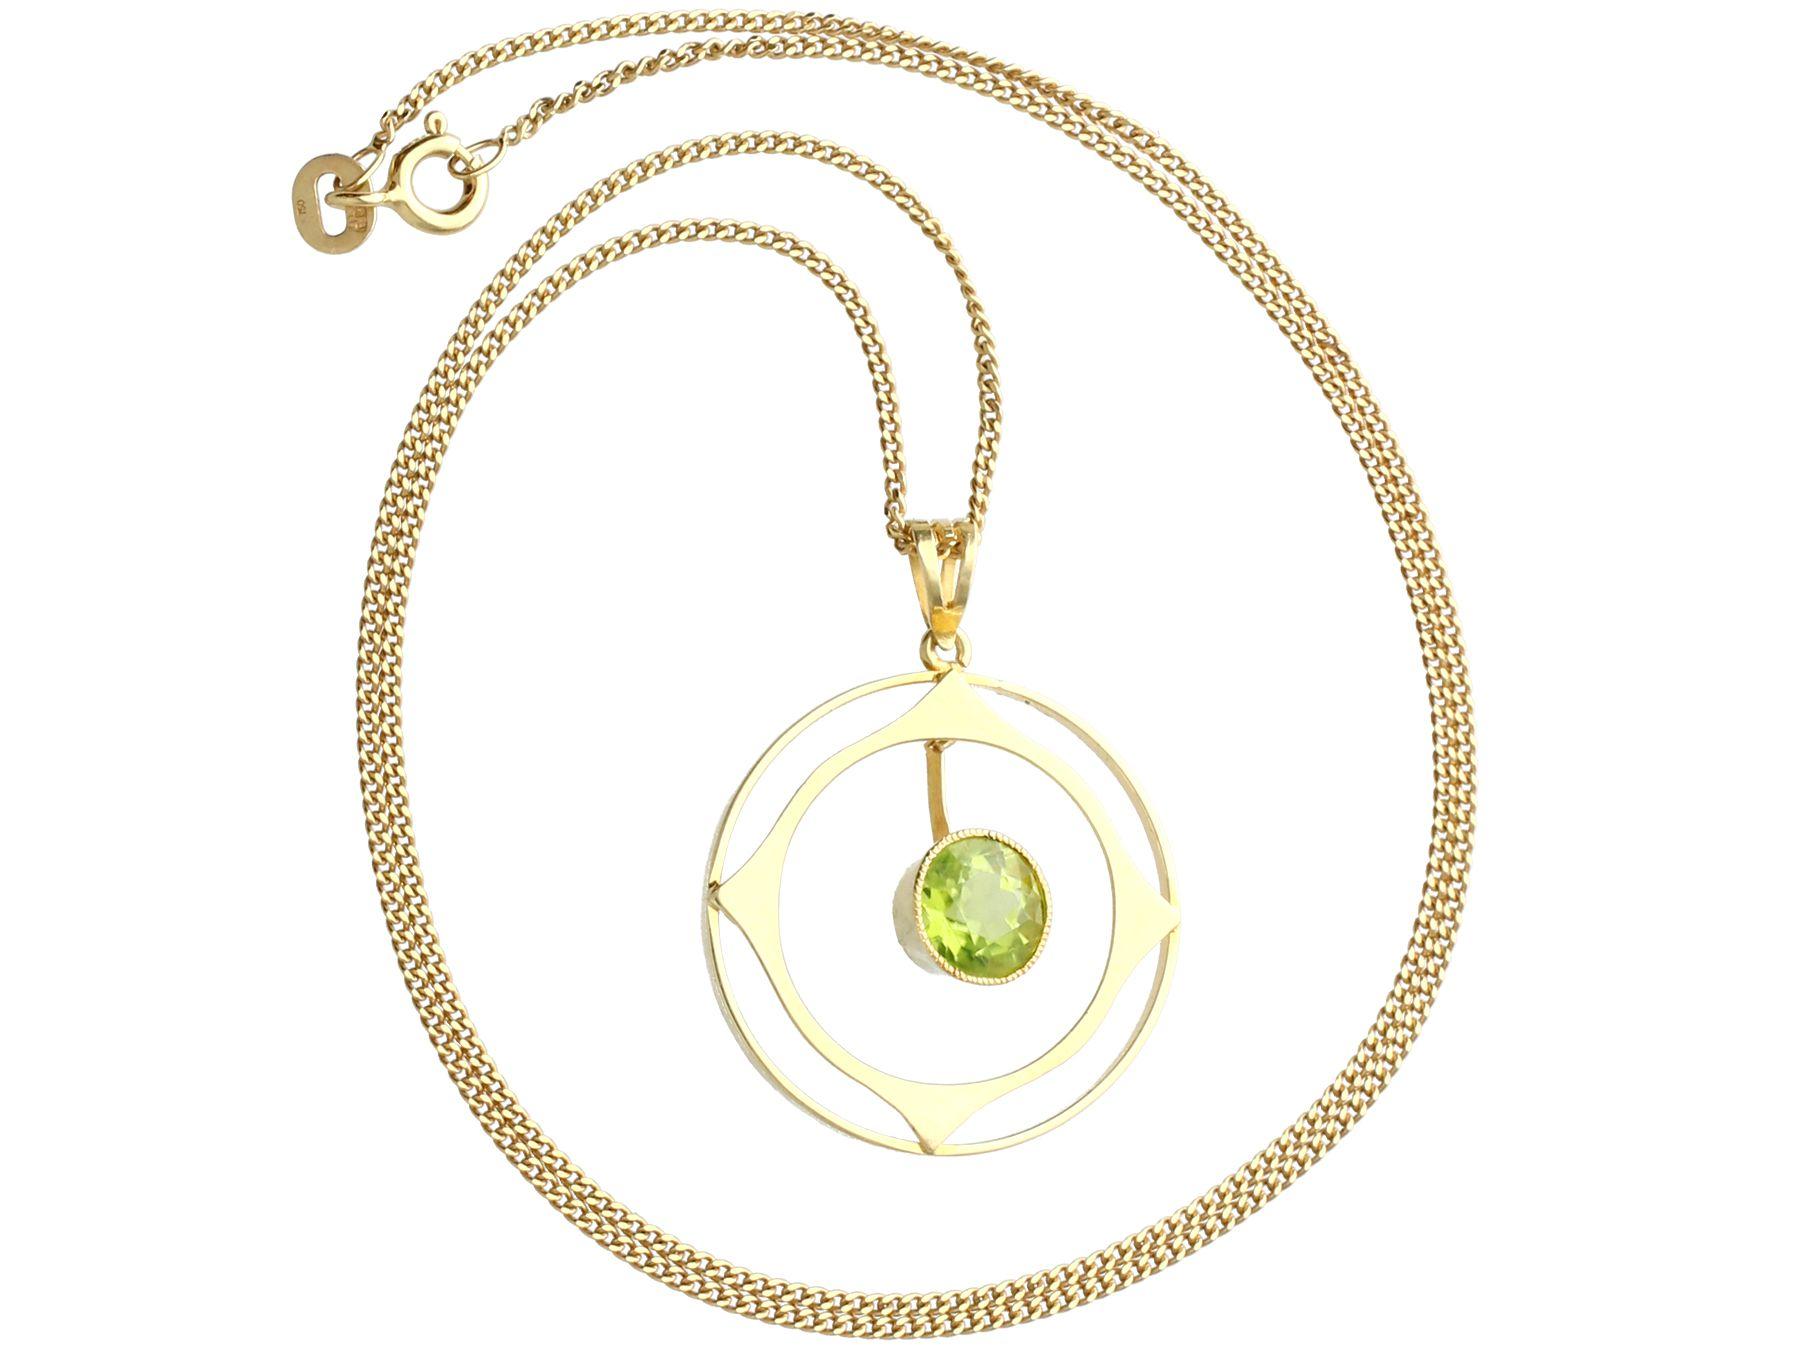 A fine and impressive antique 1.83 Carat peridot and 15k yellow gold pendant; part of our diverse antique jewelry and estate jewelry collections.

This fine and impressive antique pendant has been crafted in 15k yellow gold.

The pierced decorated,